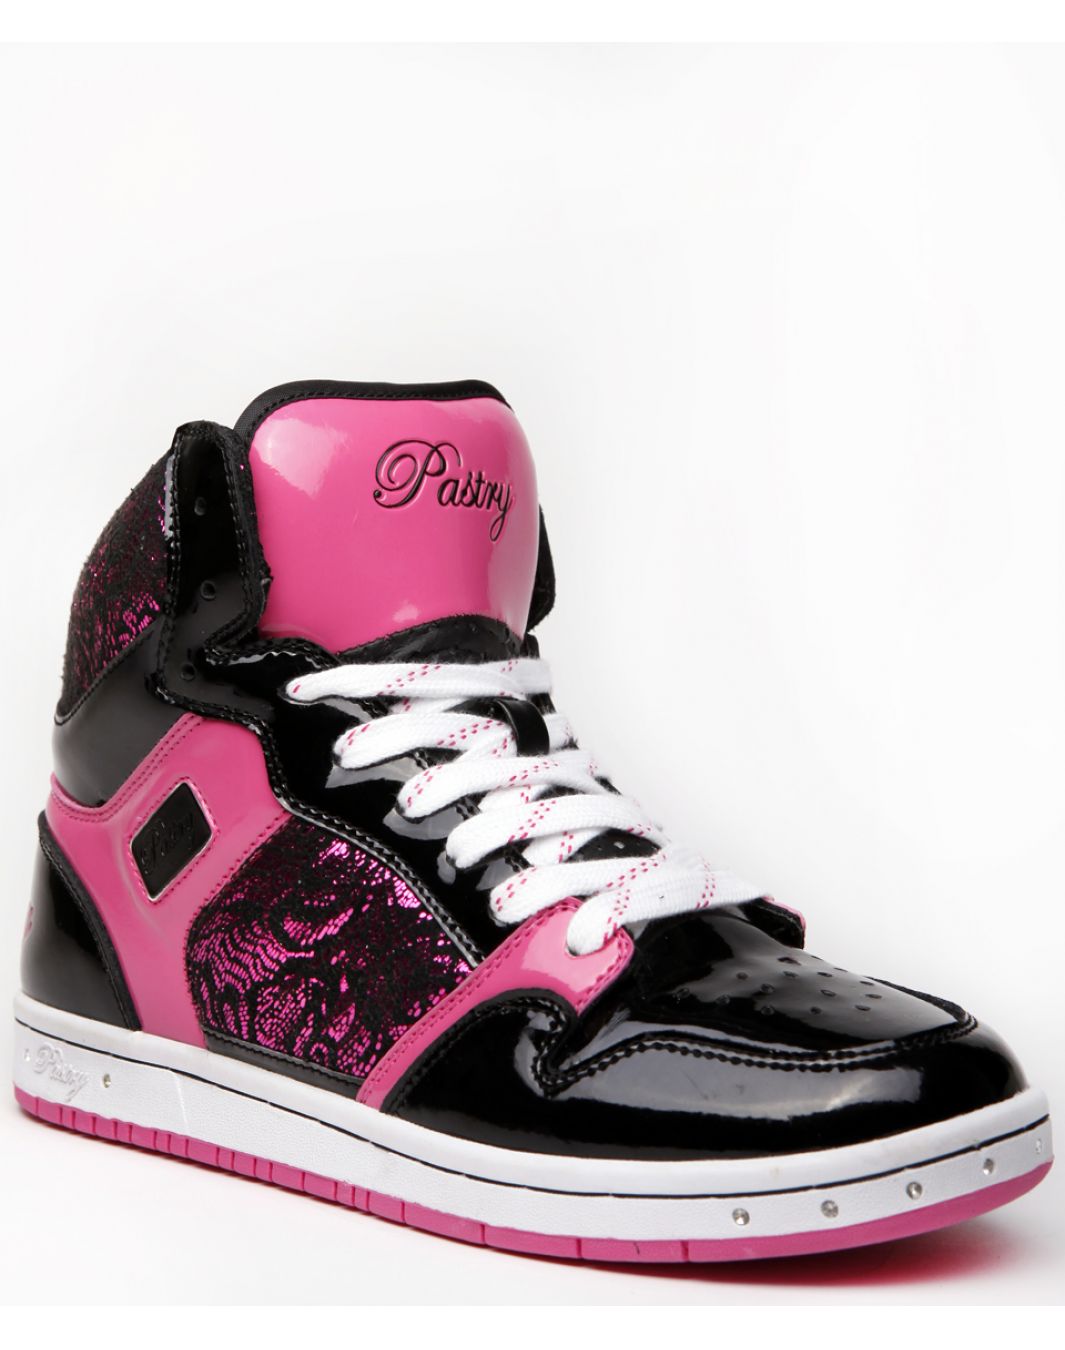 pastry high tops